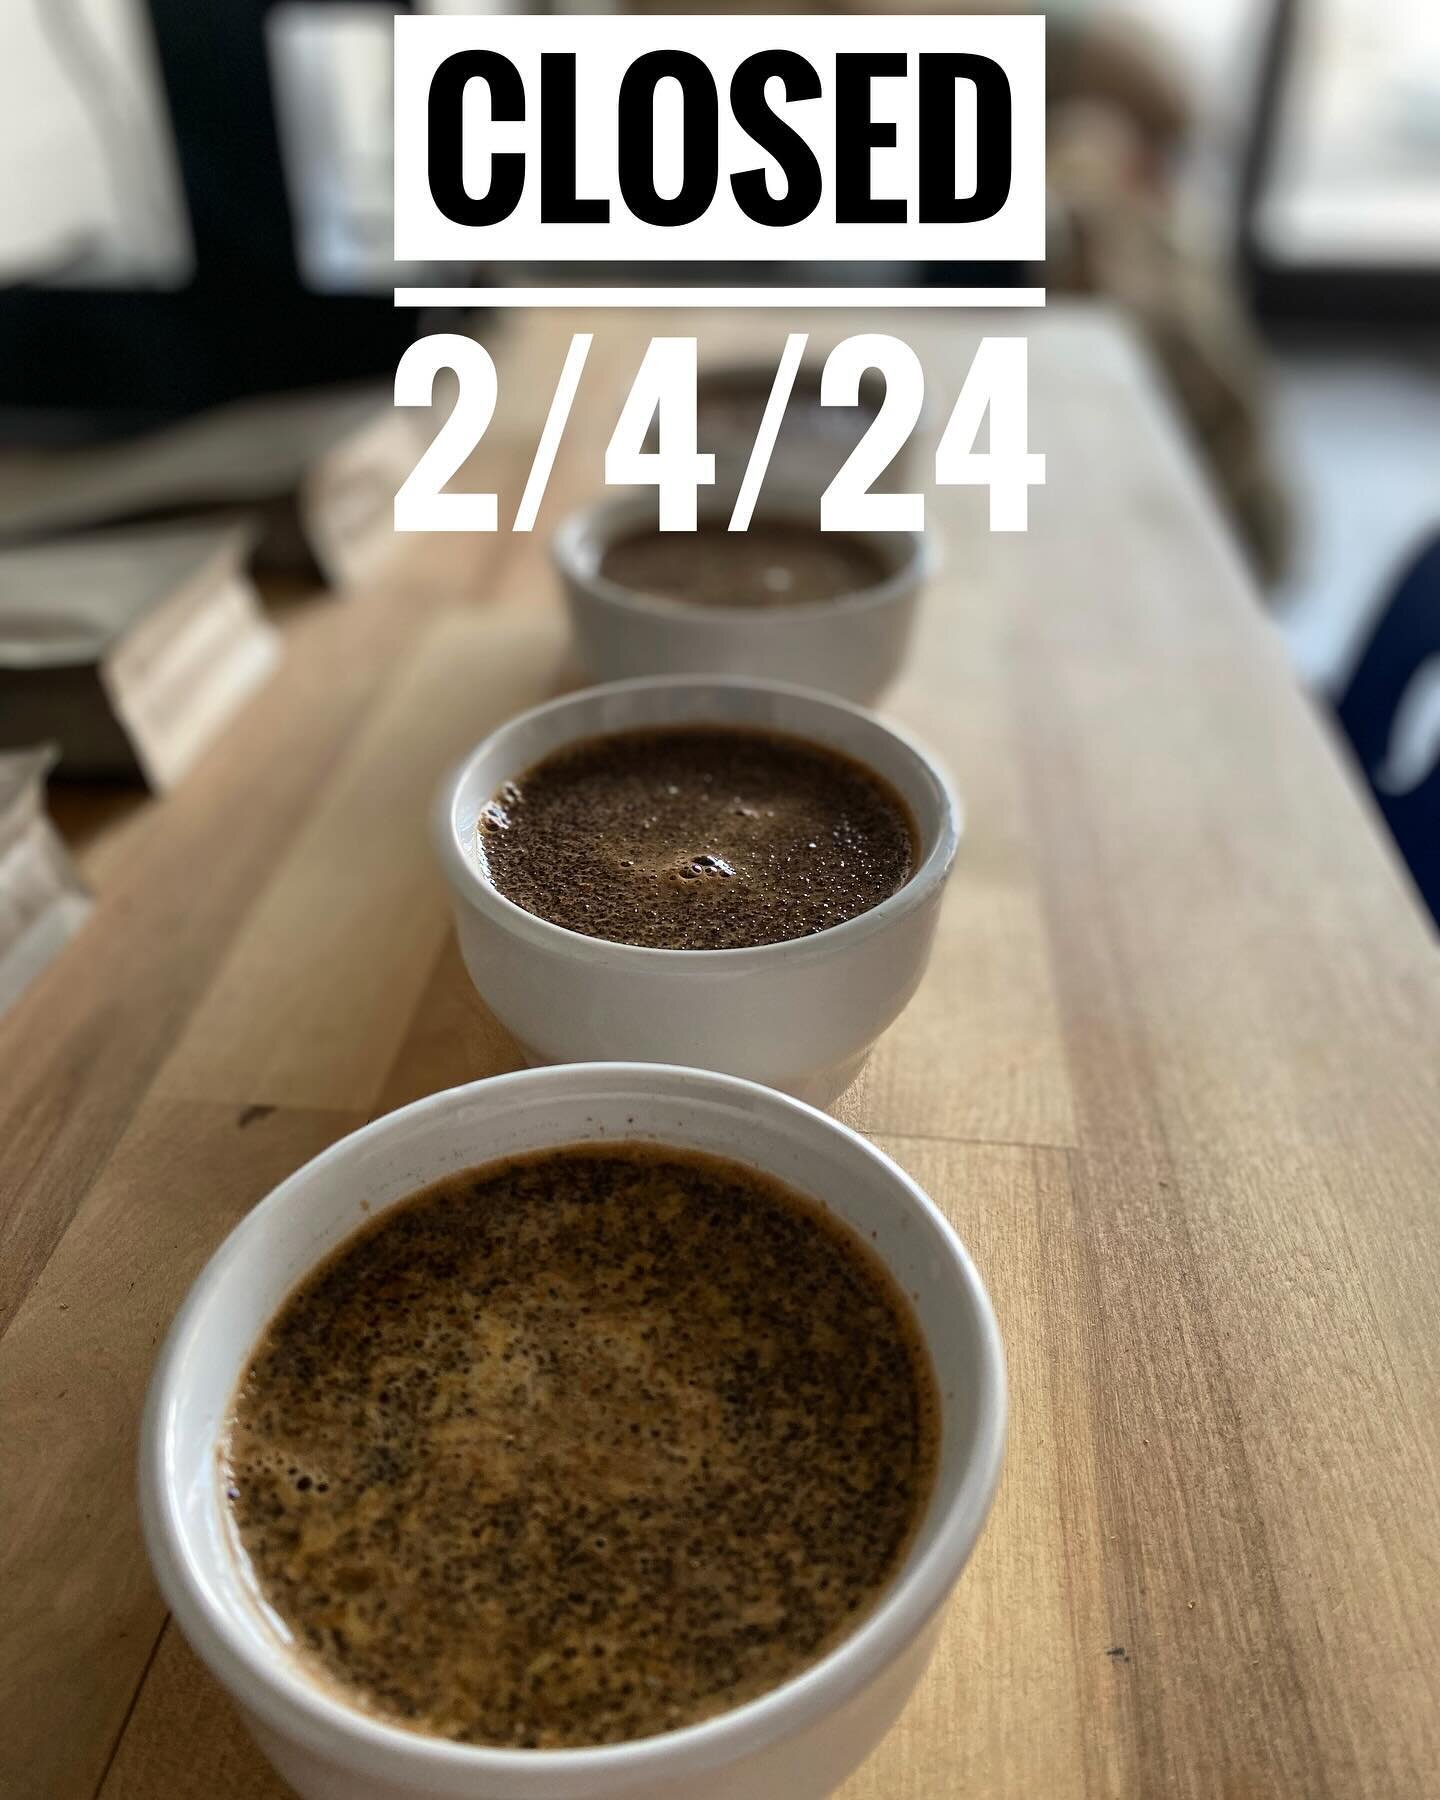 Sorry, but we&rsquo;ll be unexpectedly closed today, February 2nd.